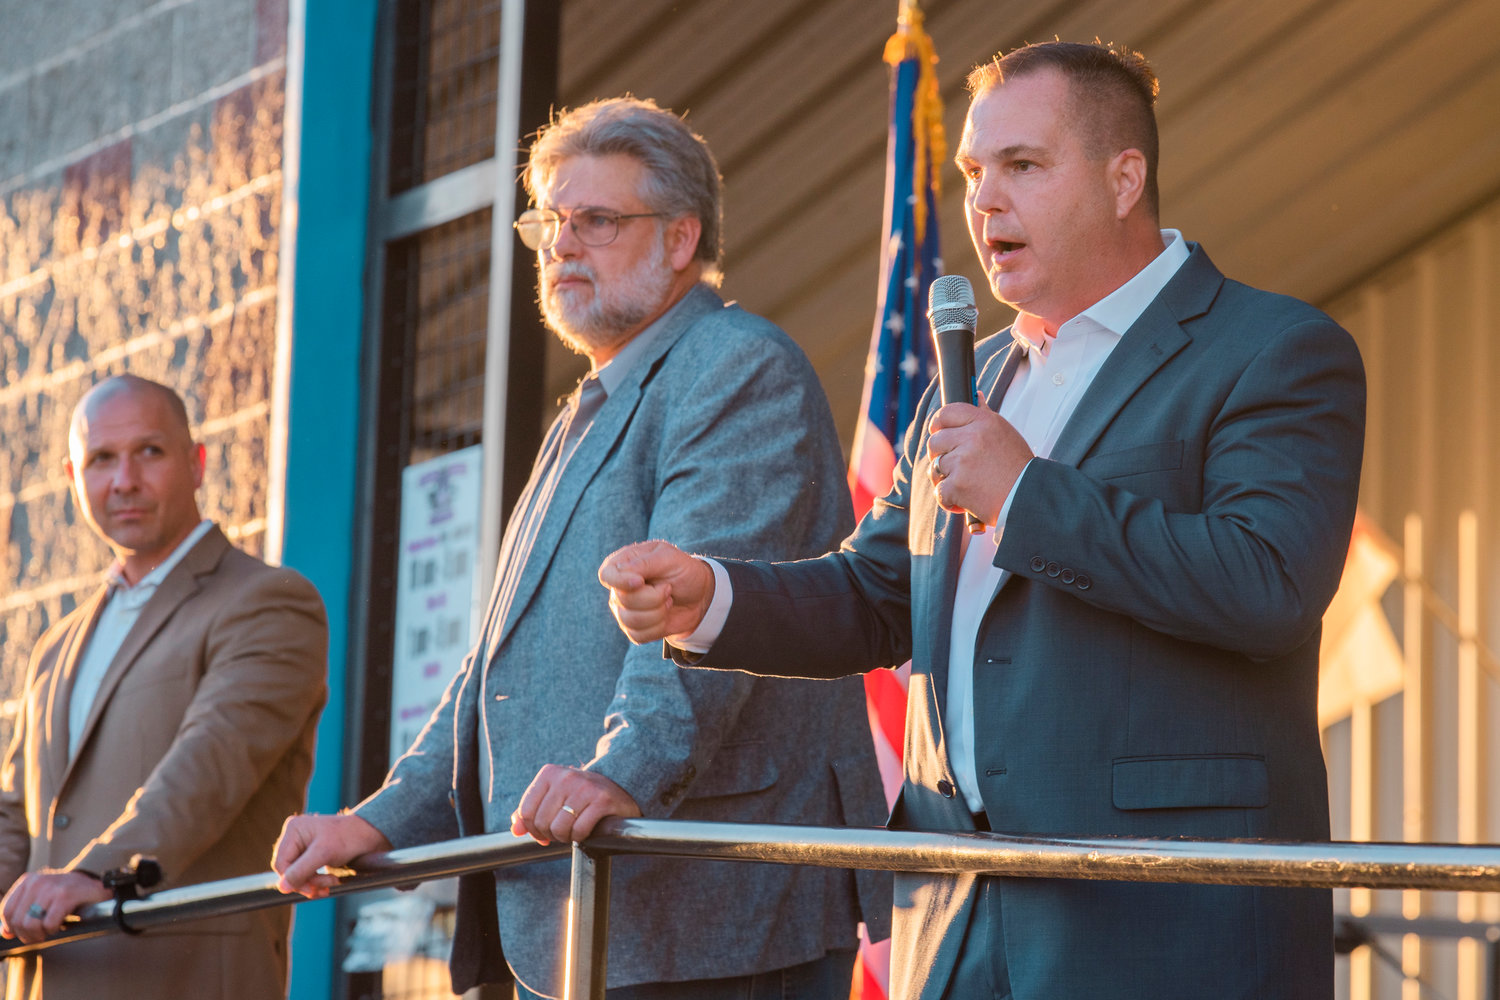 Washington State Sen. John Braun uses a mic to speak to crowds during a town hall event at the Veterans Memorial Museum alongside state Reps. Peter Abbarno and Ed Orcutt in 2021.